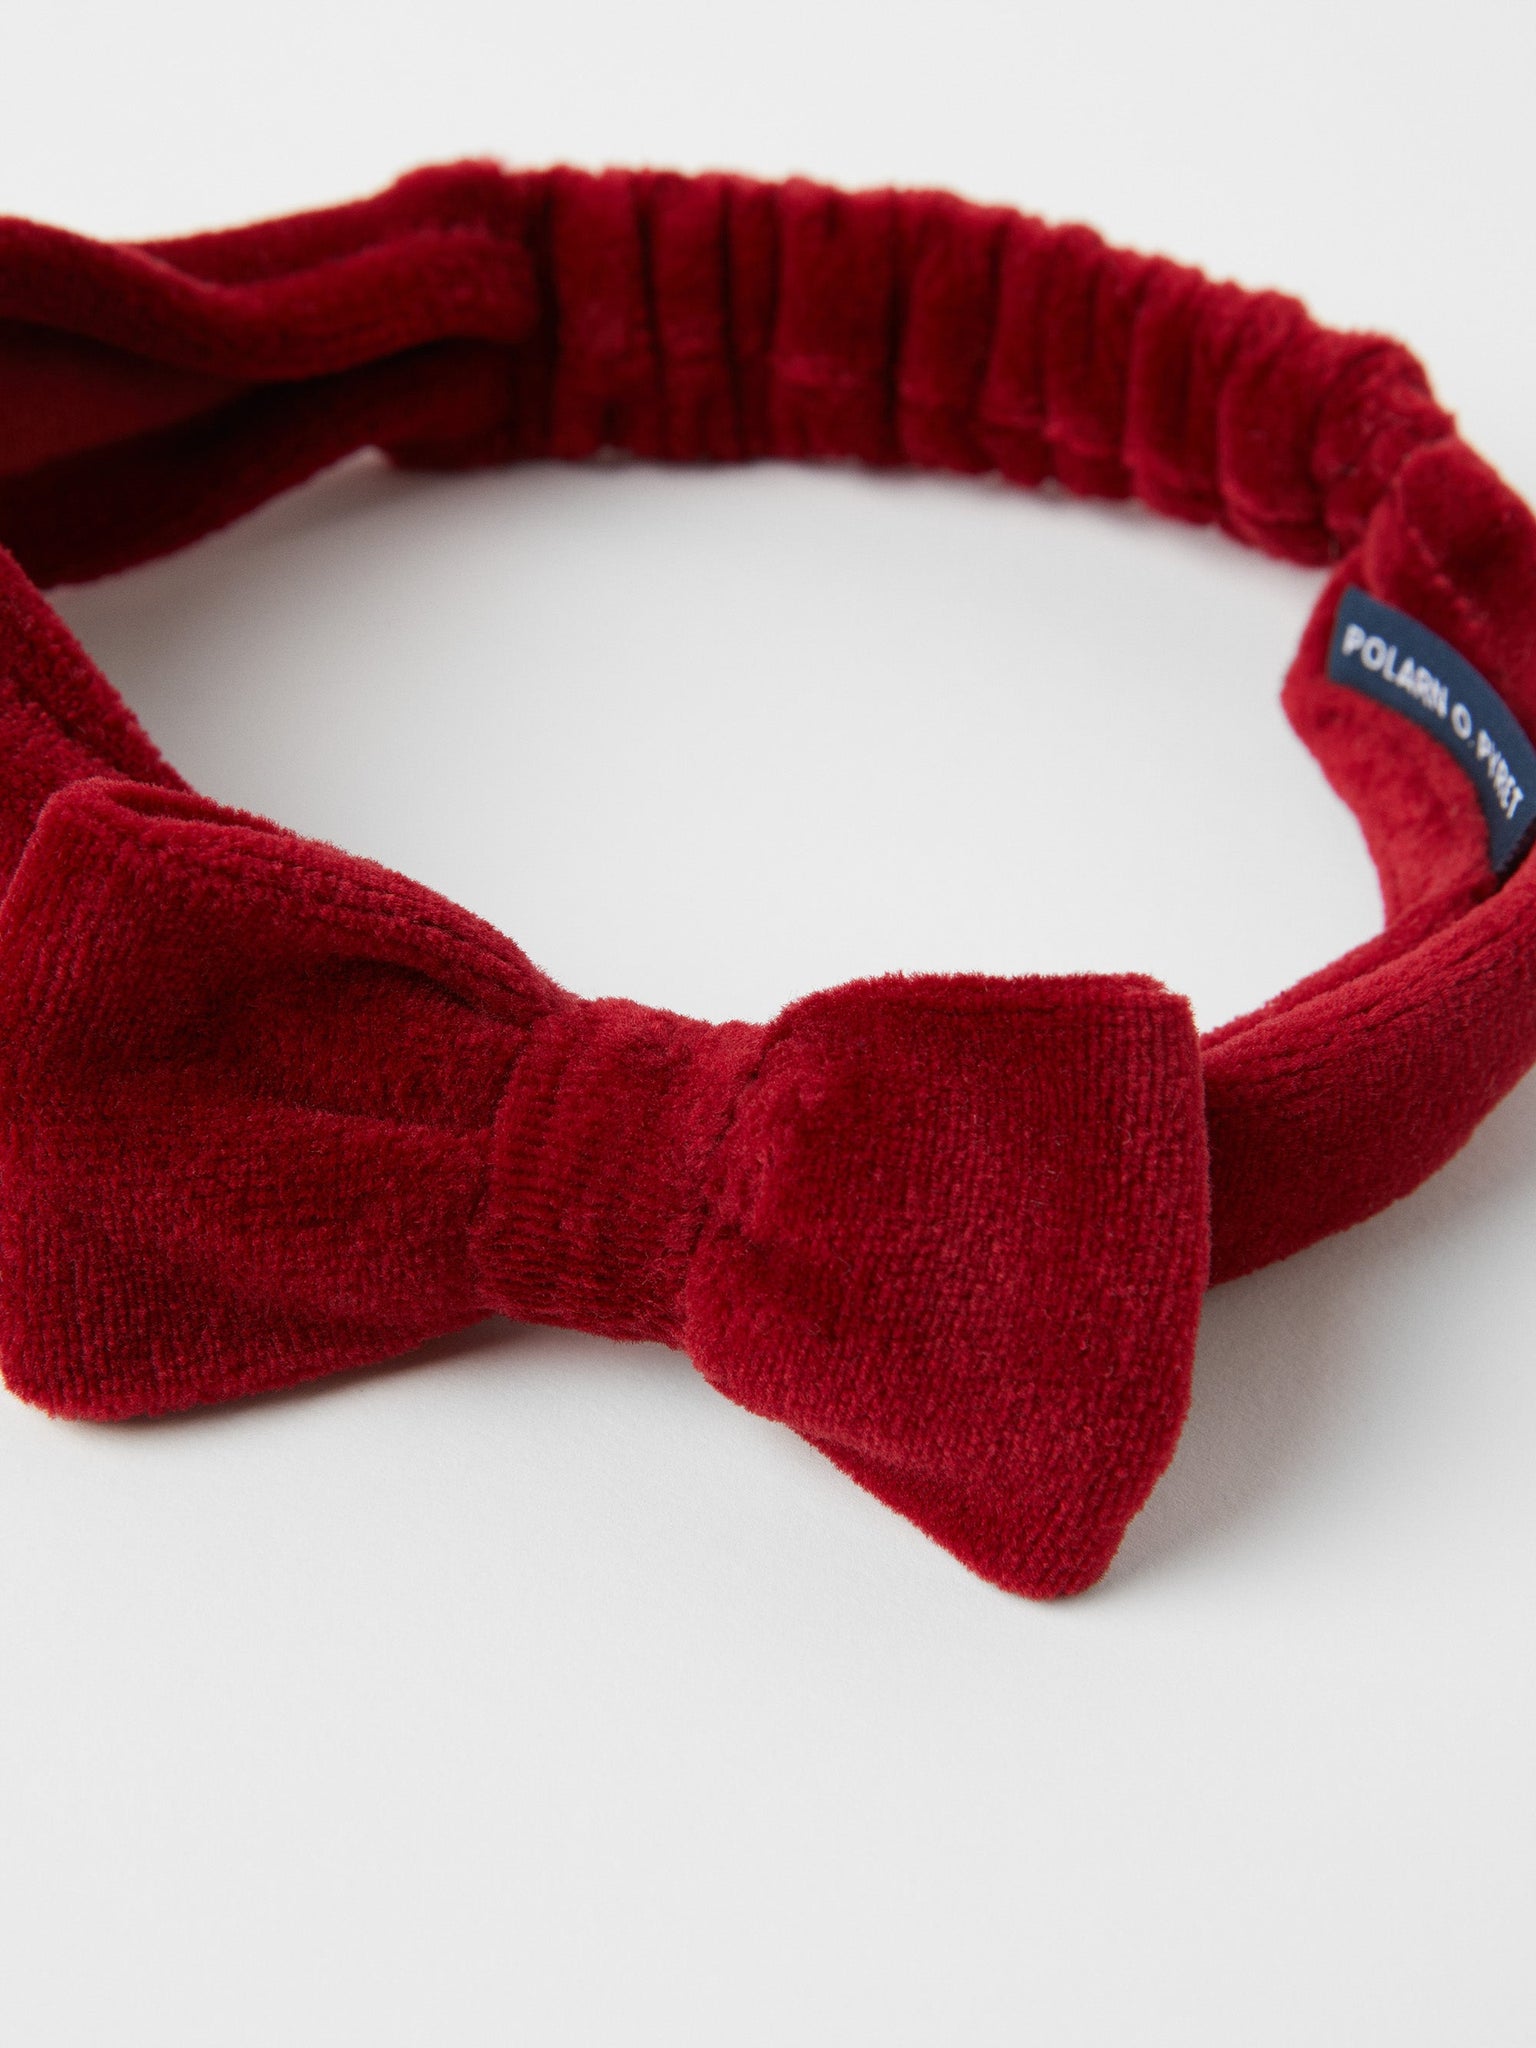 Red Velour Kids Hair Band from the Polarn O. Pyret kidswear collection. The best ethical kids clothes